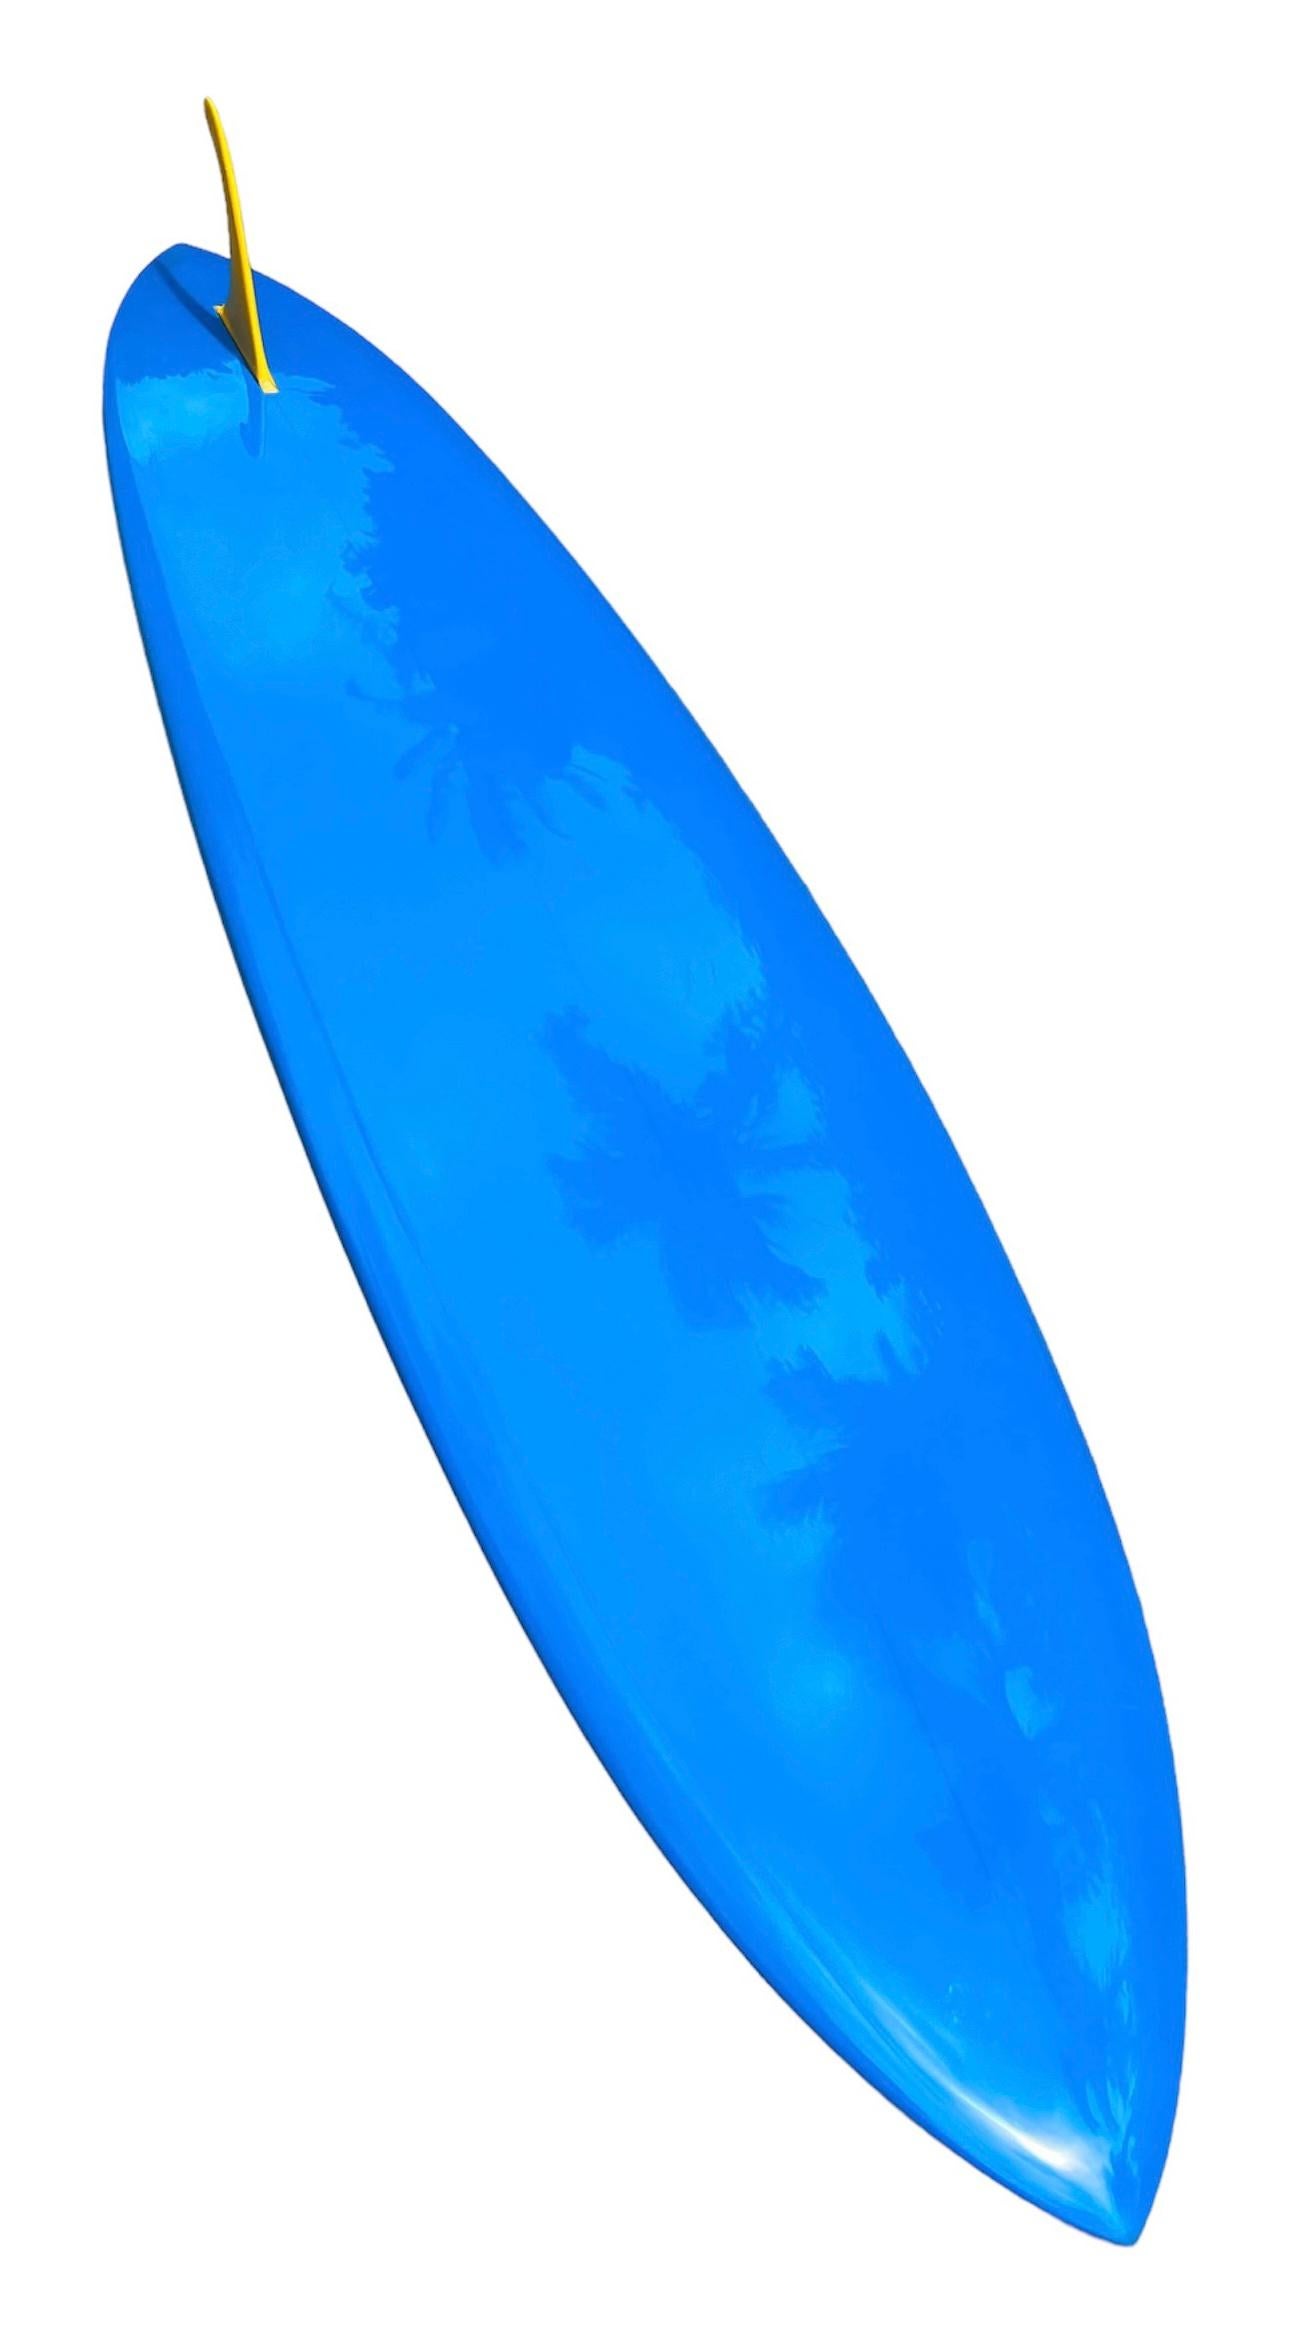 1967 Vintage Hansen pintail Mini Gun surfboard. Features sky blue inset, blue opaque bottom with wrap-around rails, and clear foam center “spear”. Blue and black double pinstripes with Hansen’s removable fin system and yellow Hansen single fin. A